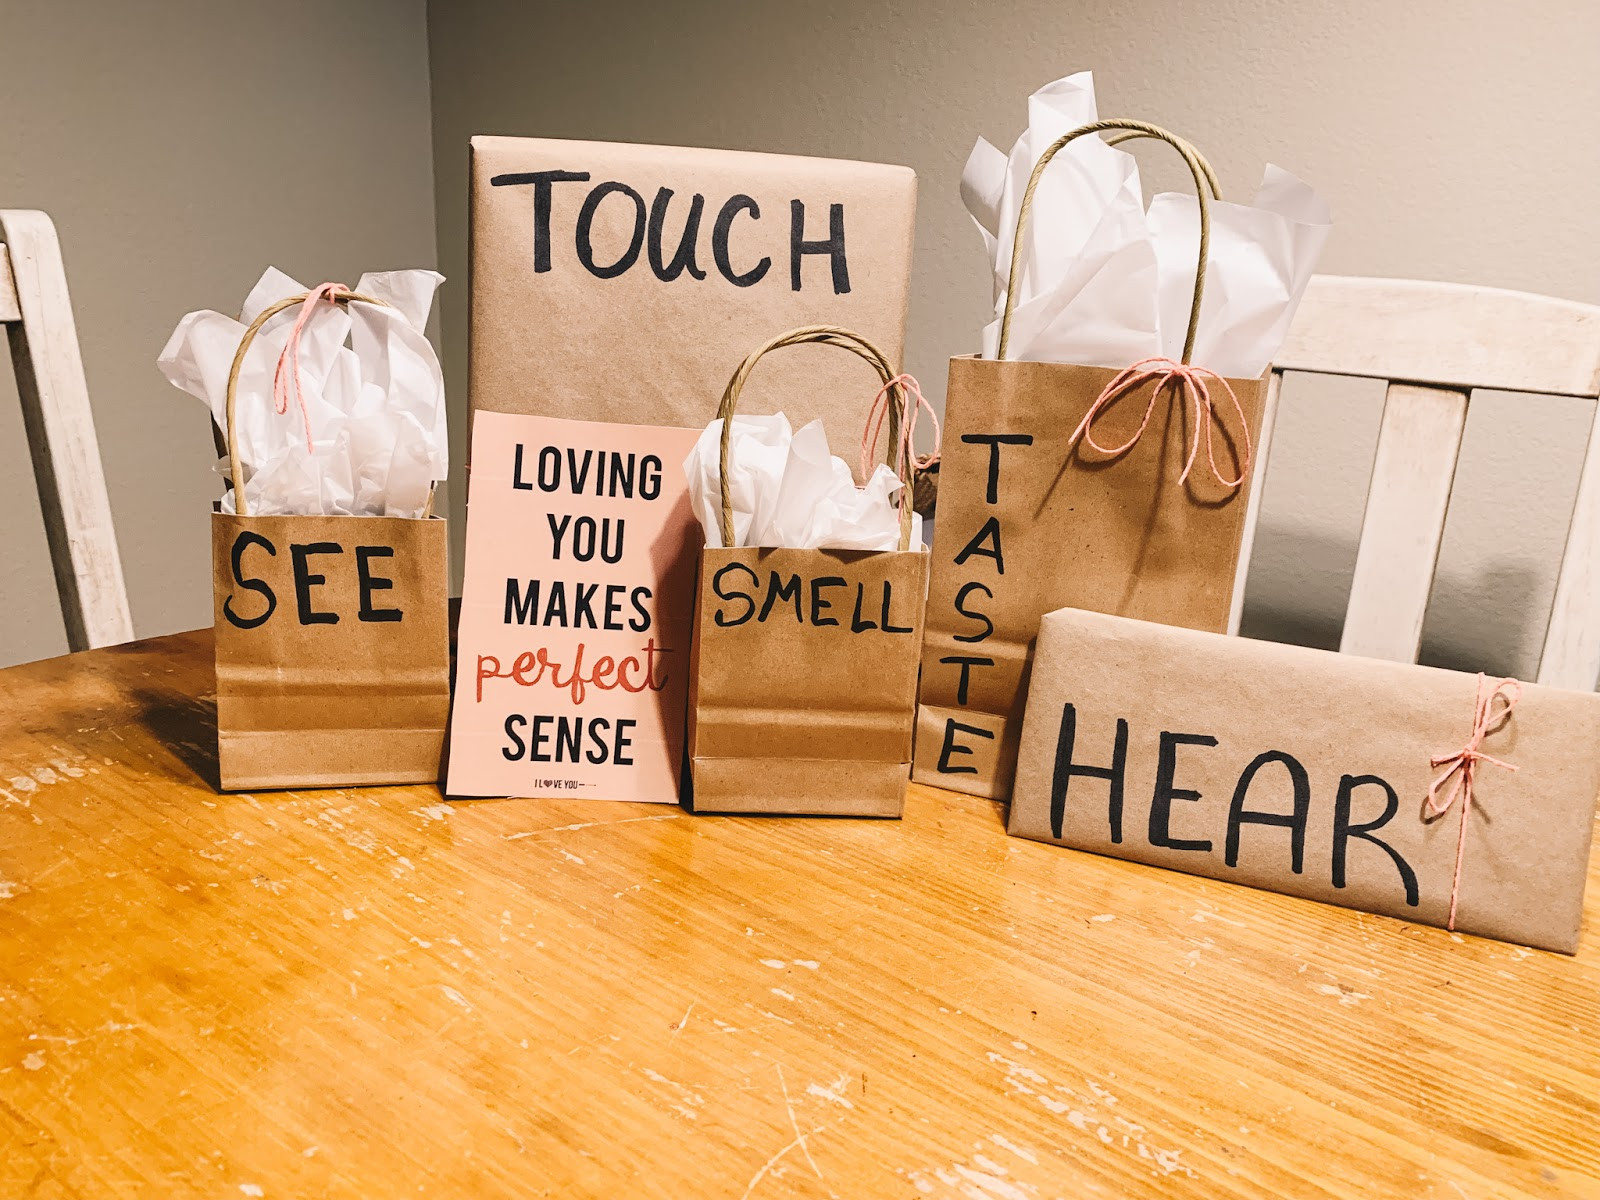 Valentines Day Gifts For Her Ideas
 The 5 Senses Valentines Day Gift Ideas for Him & Her